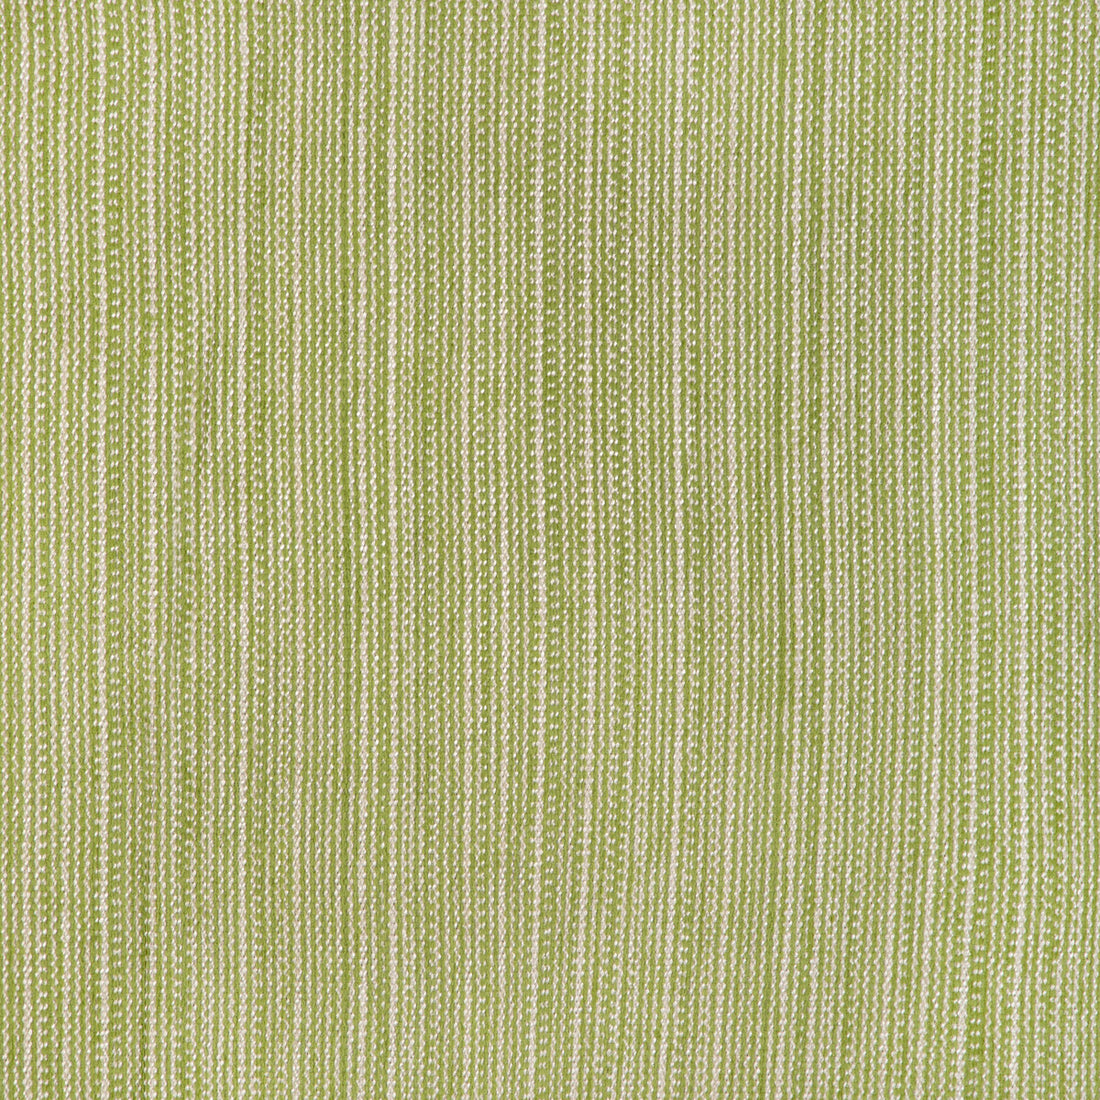 Kravet Design fabric in 36880-3 color - pattern 36880.3.0 - by Kravet Design in the Insideout Seaqual Initiative collection